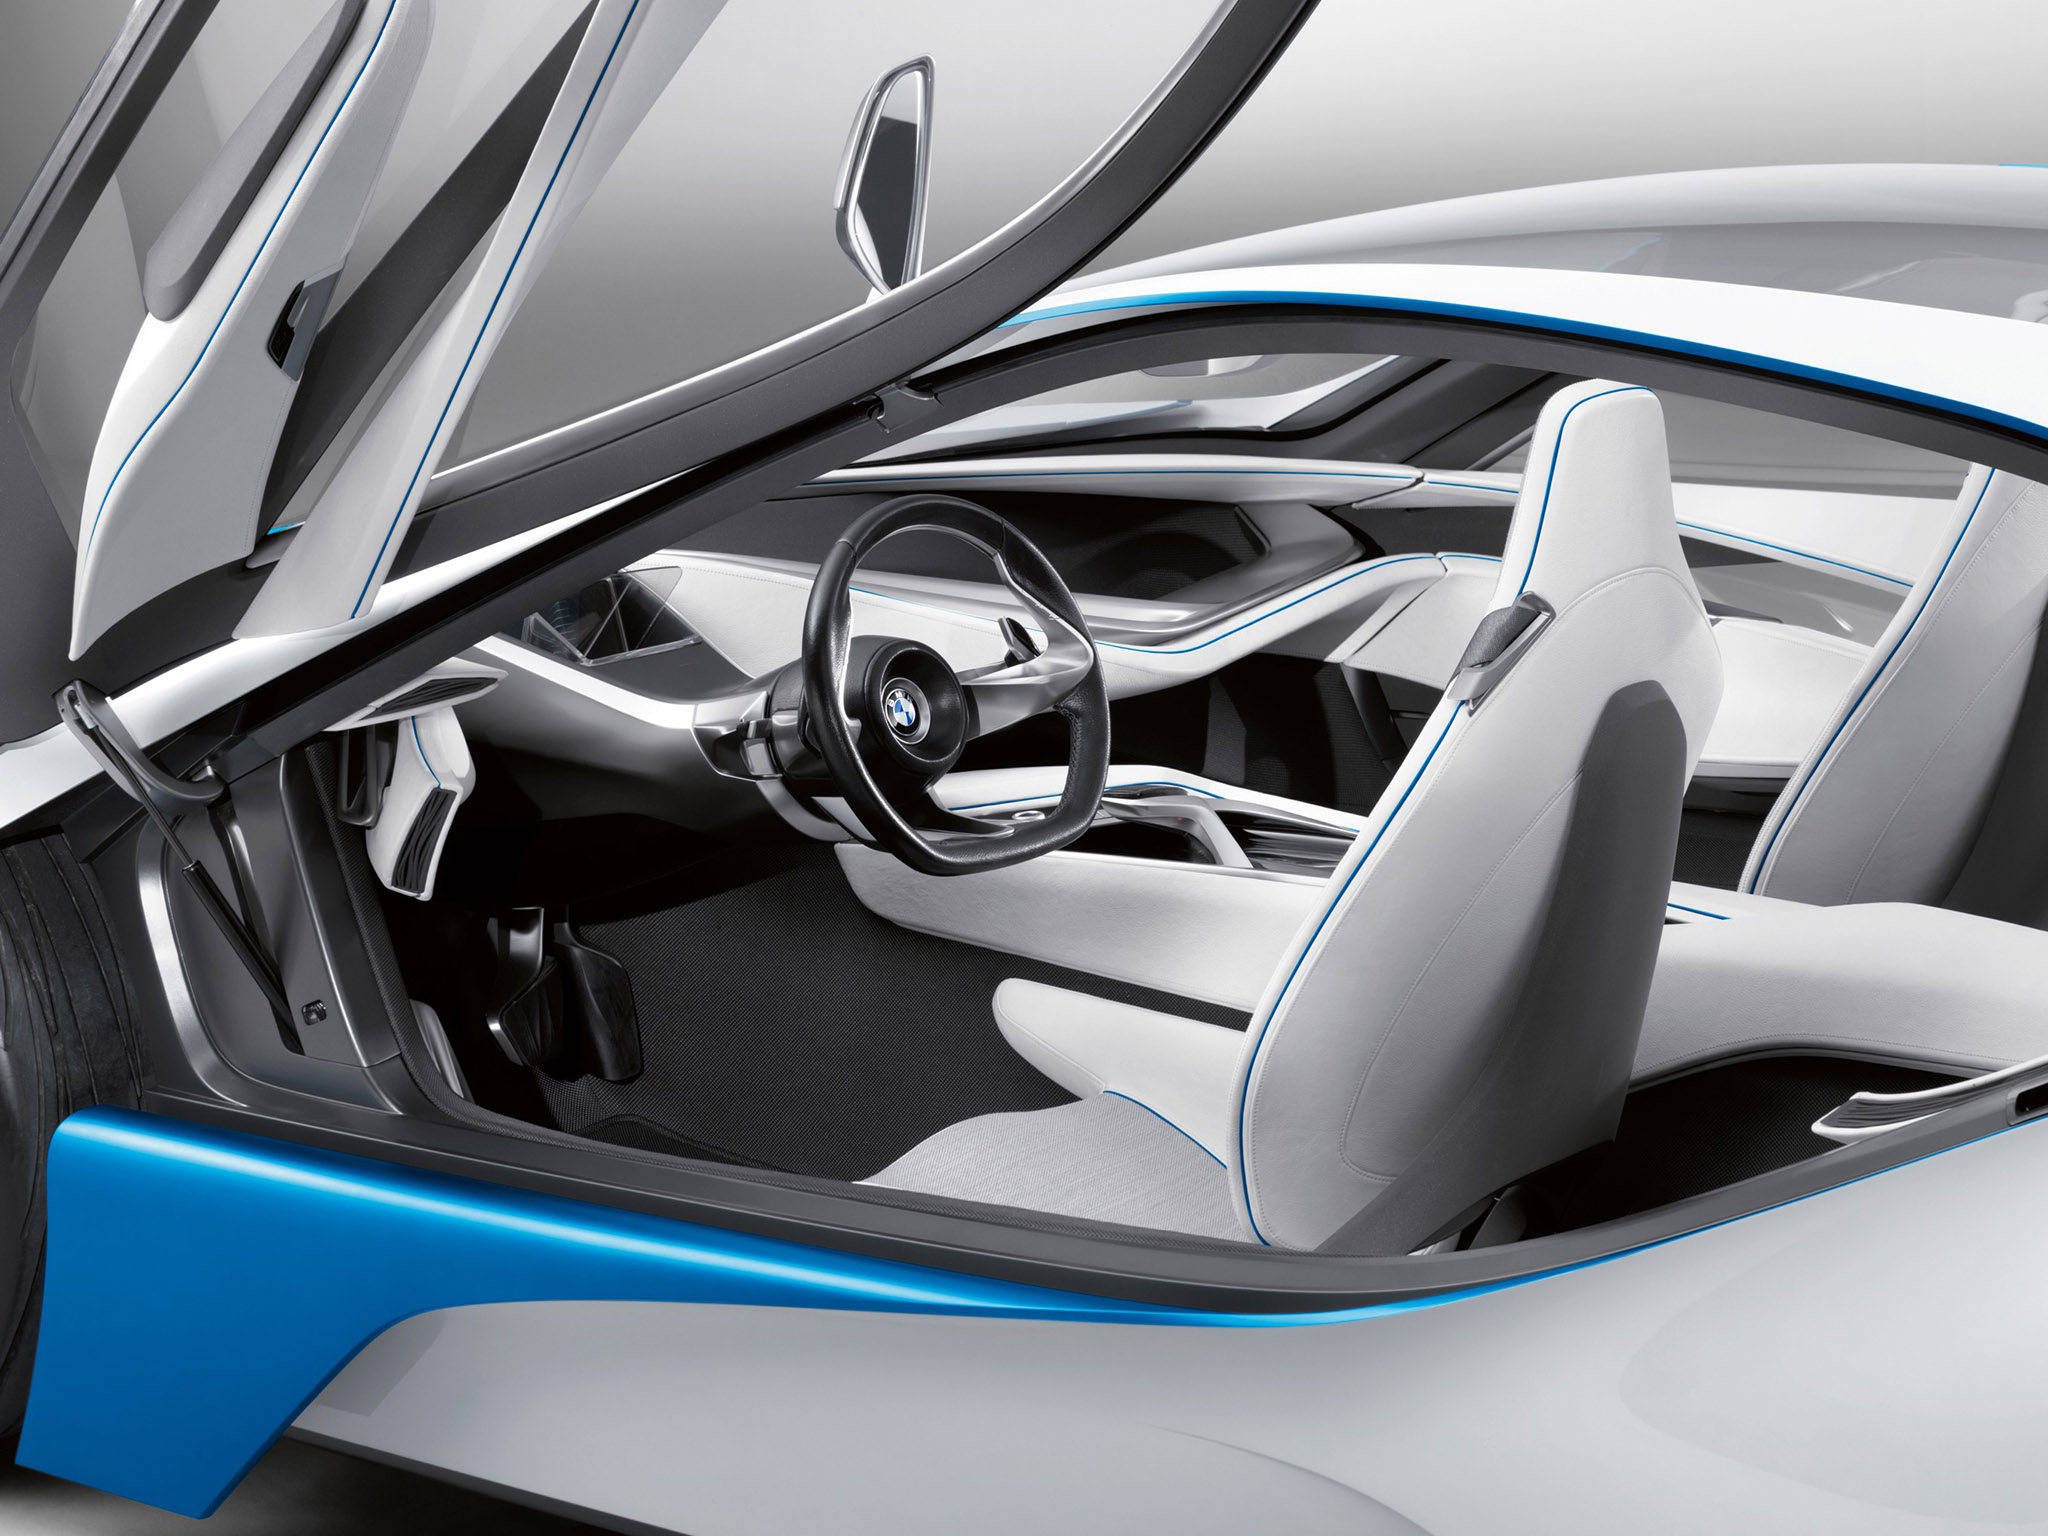 A closer look at the interior - BMW Vision Efficient